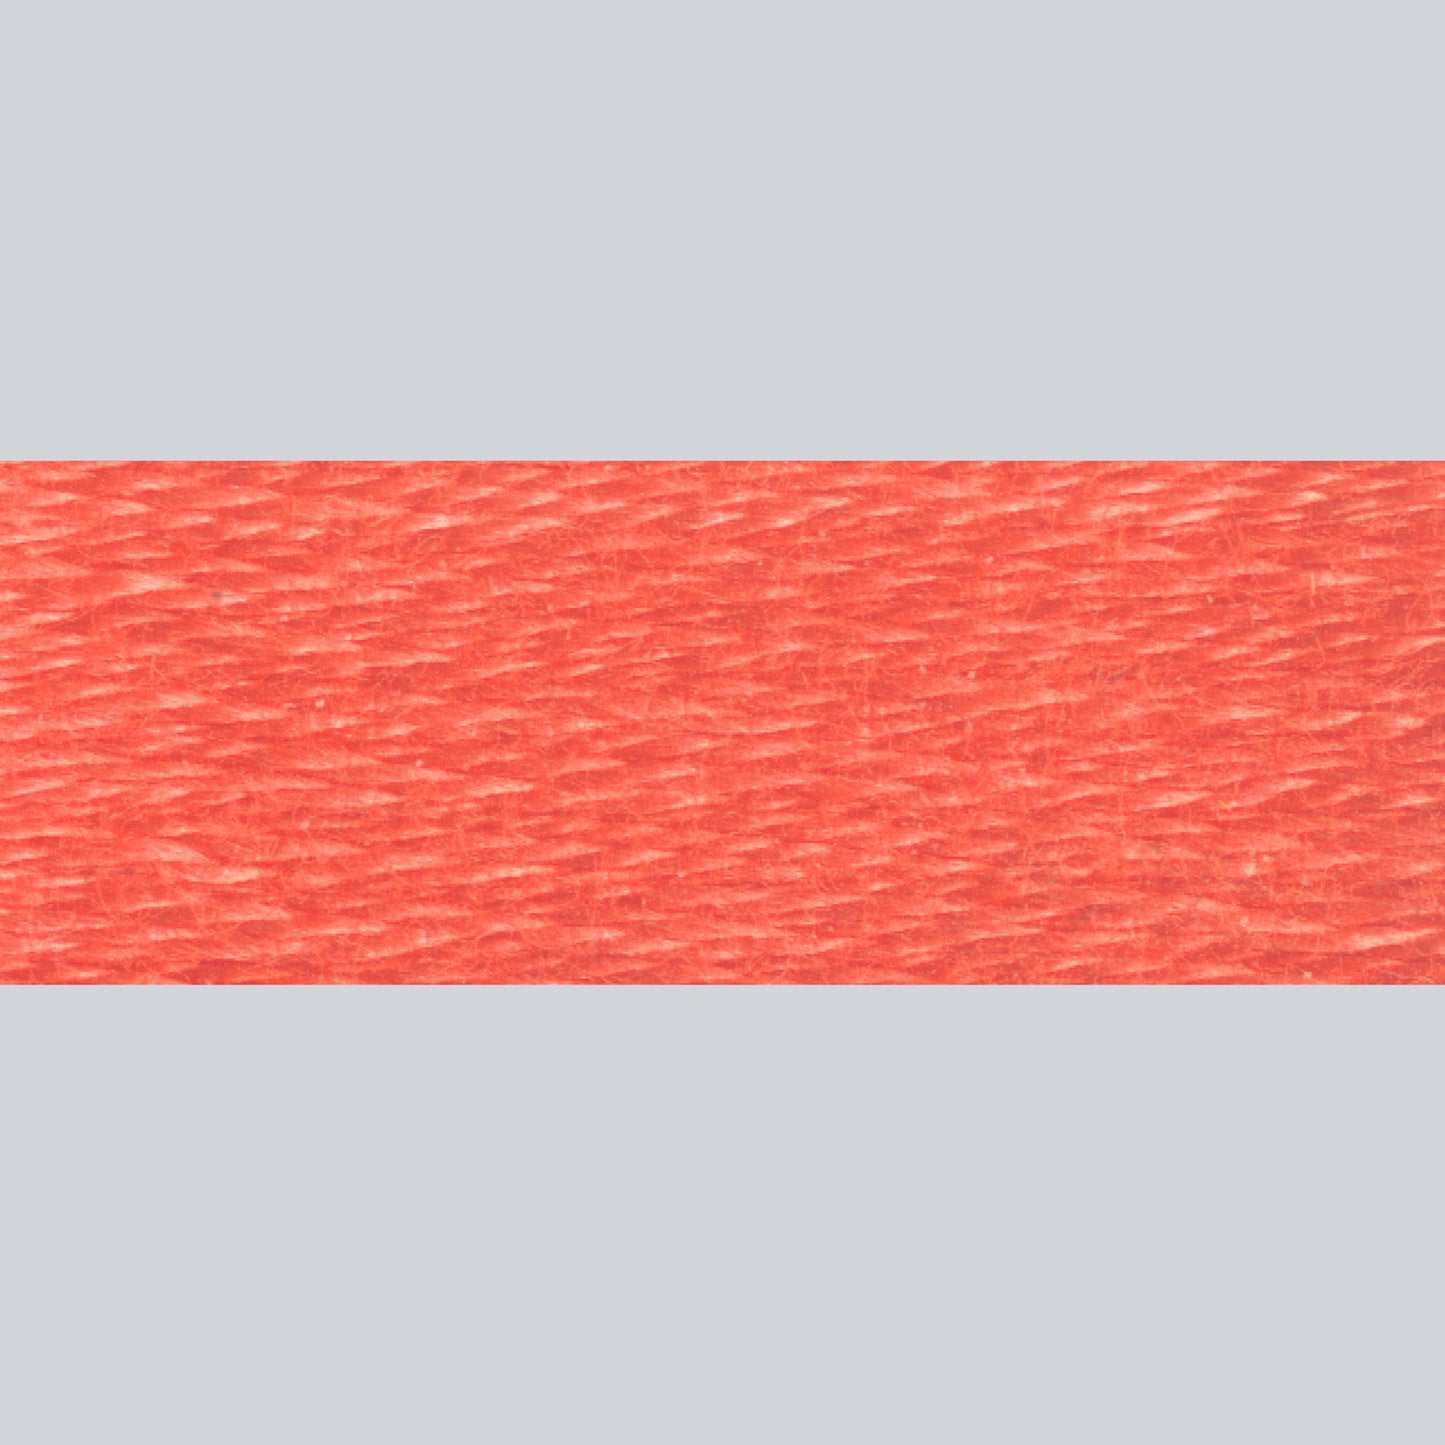 DMC Embroidery Floss - 351 Coral Alternative View #1